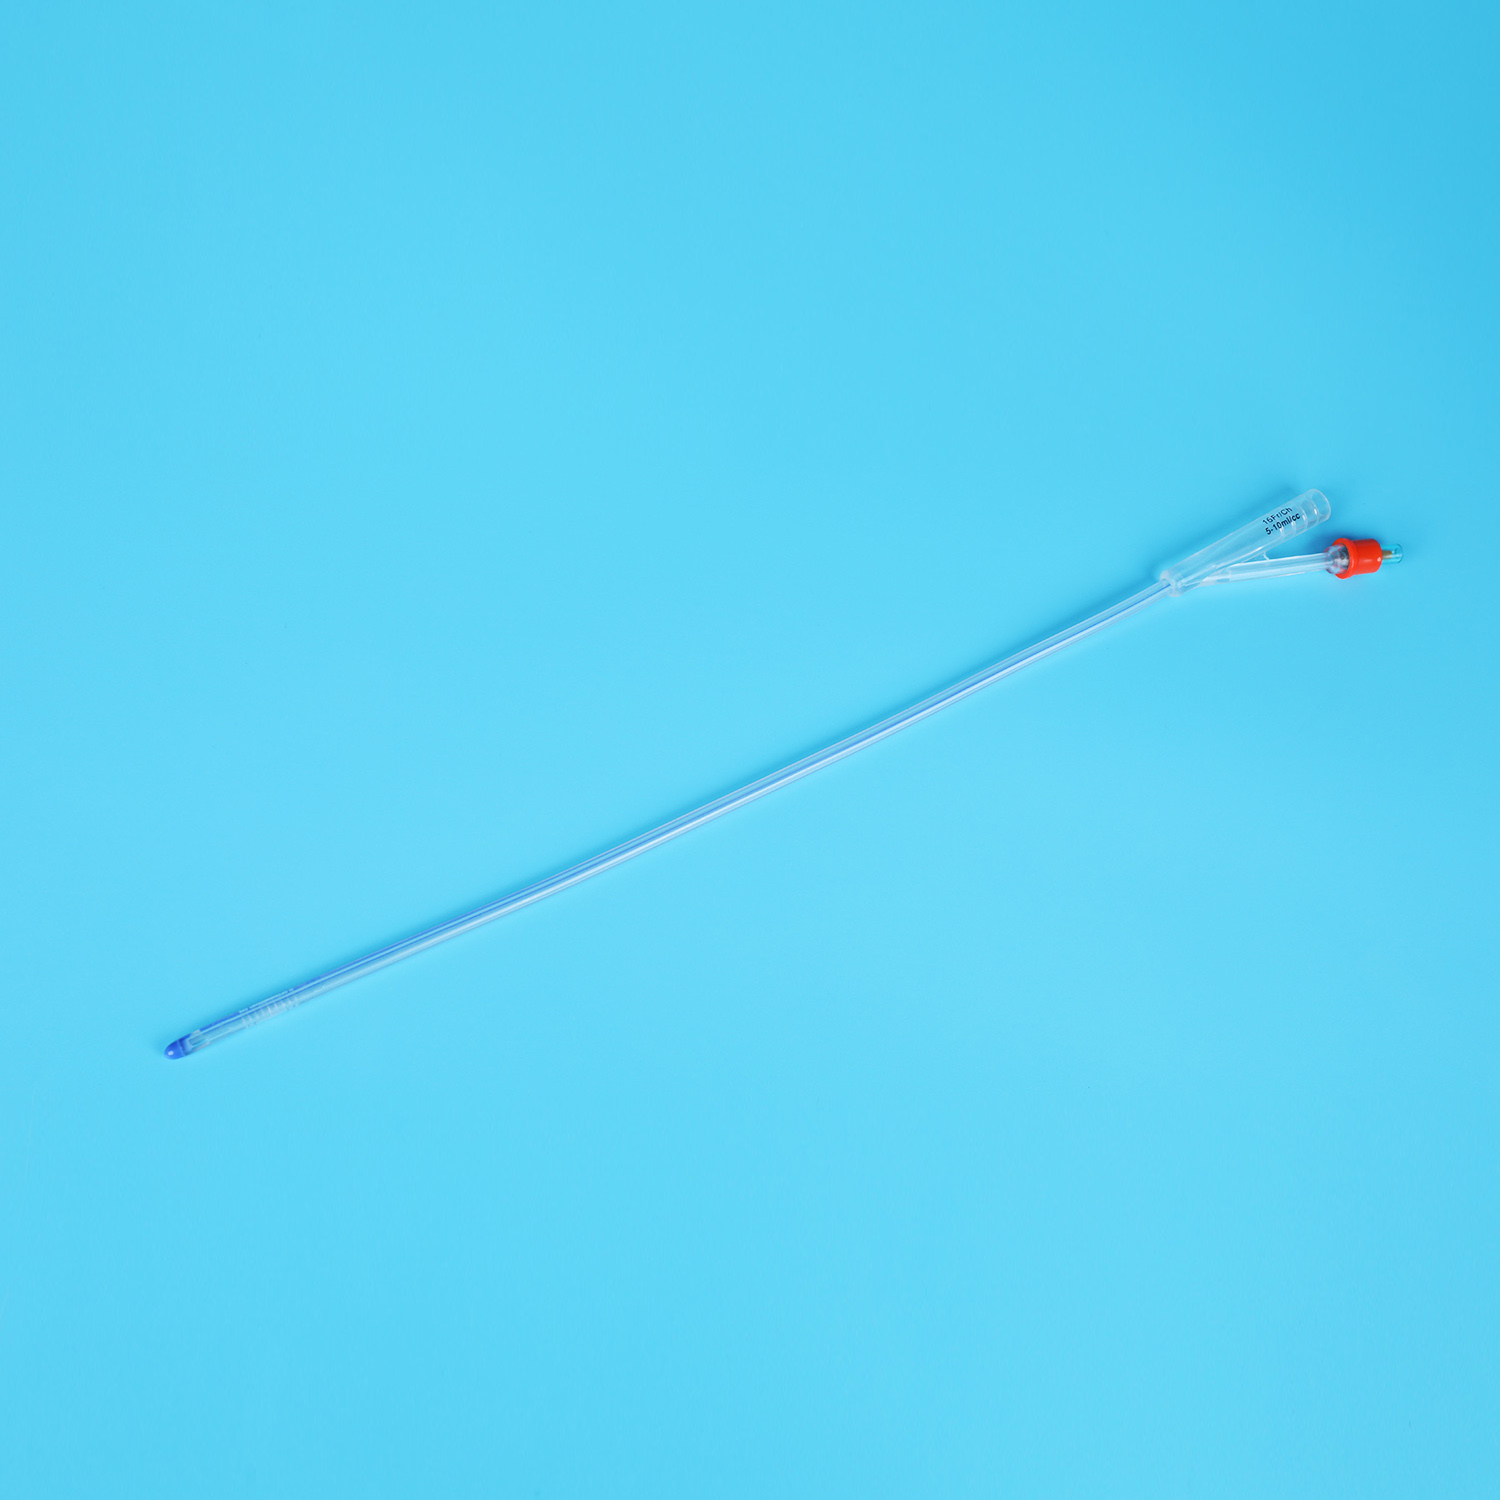 2 Way Silicone Foley Catheter nwere Unibal Integral Balloon Technology Integrated Flat Balloon Round Tipped Urethral Use